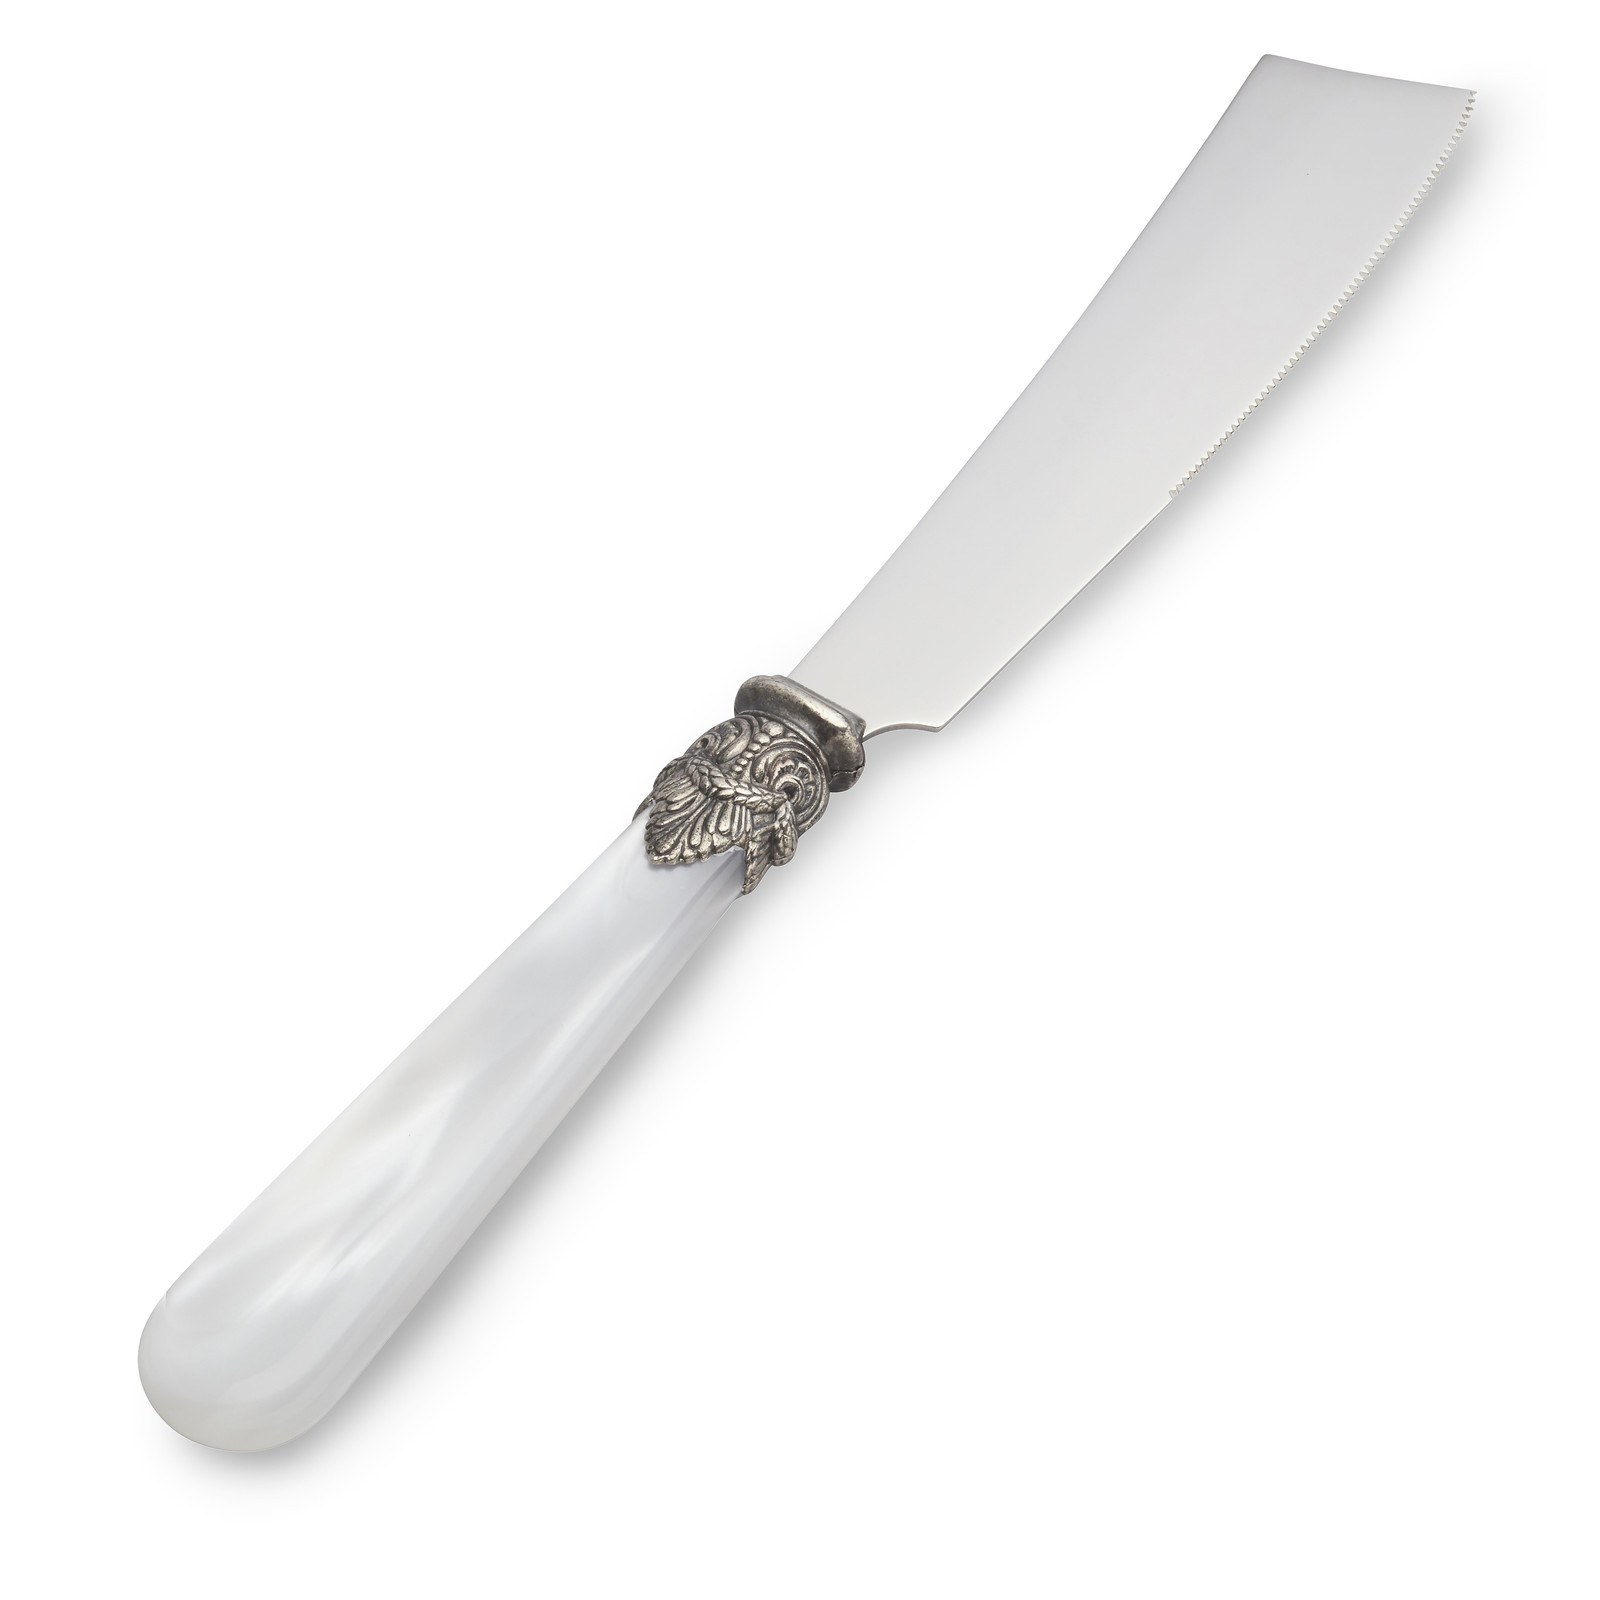 Small Cake Knife White with Mother of Pearl